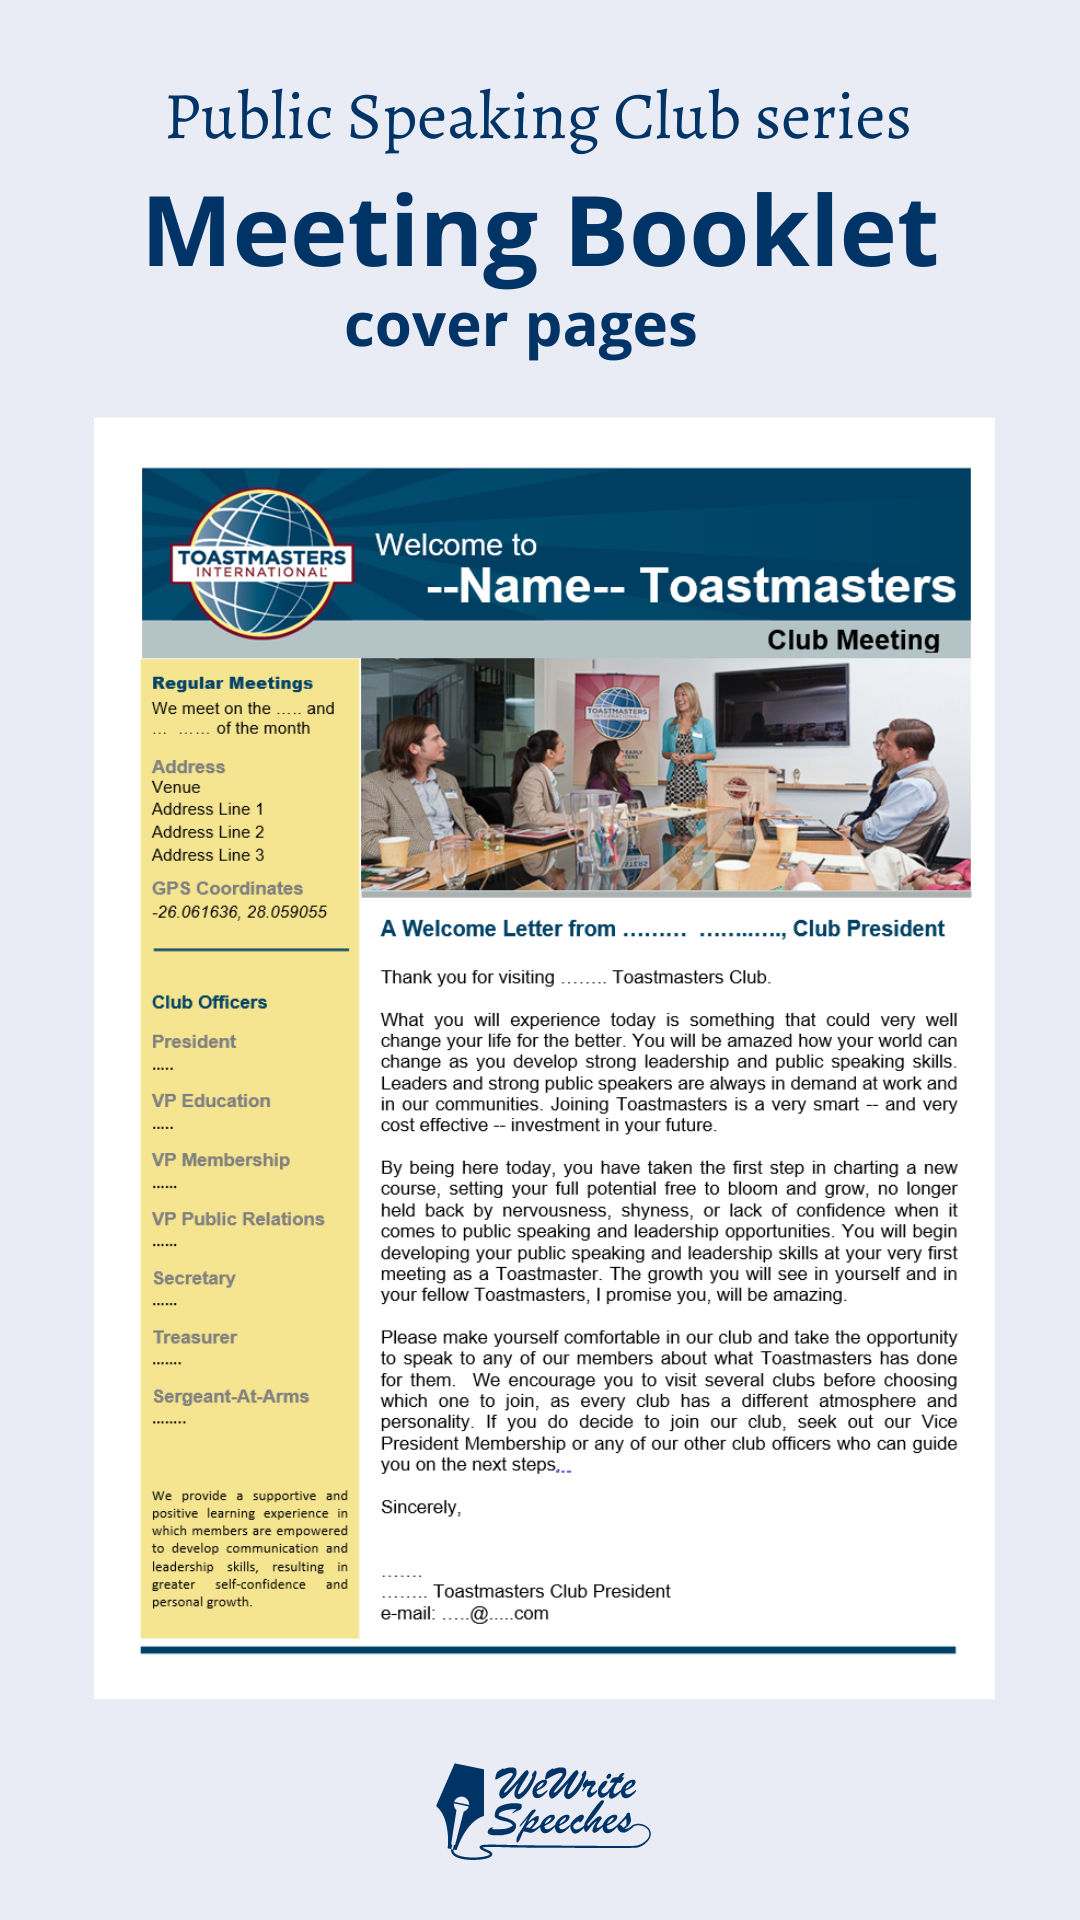 Booklet design for a Toastmasters Meeting Agenda